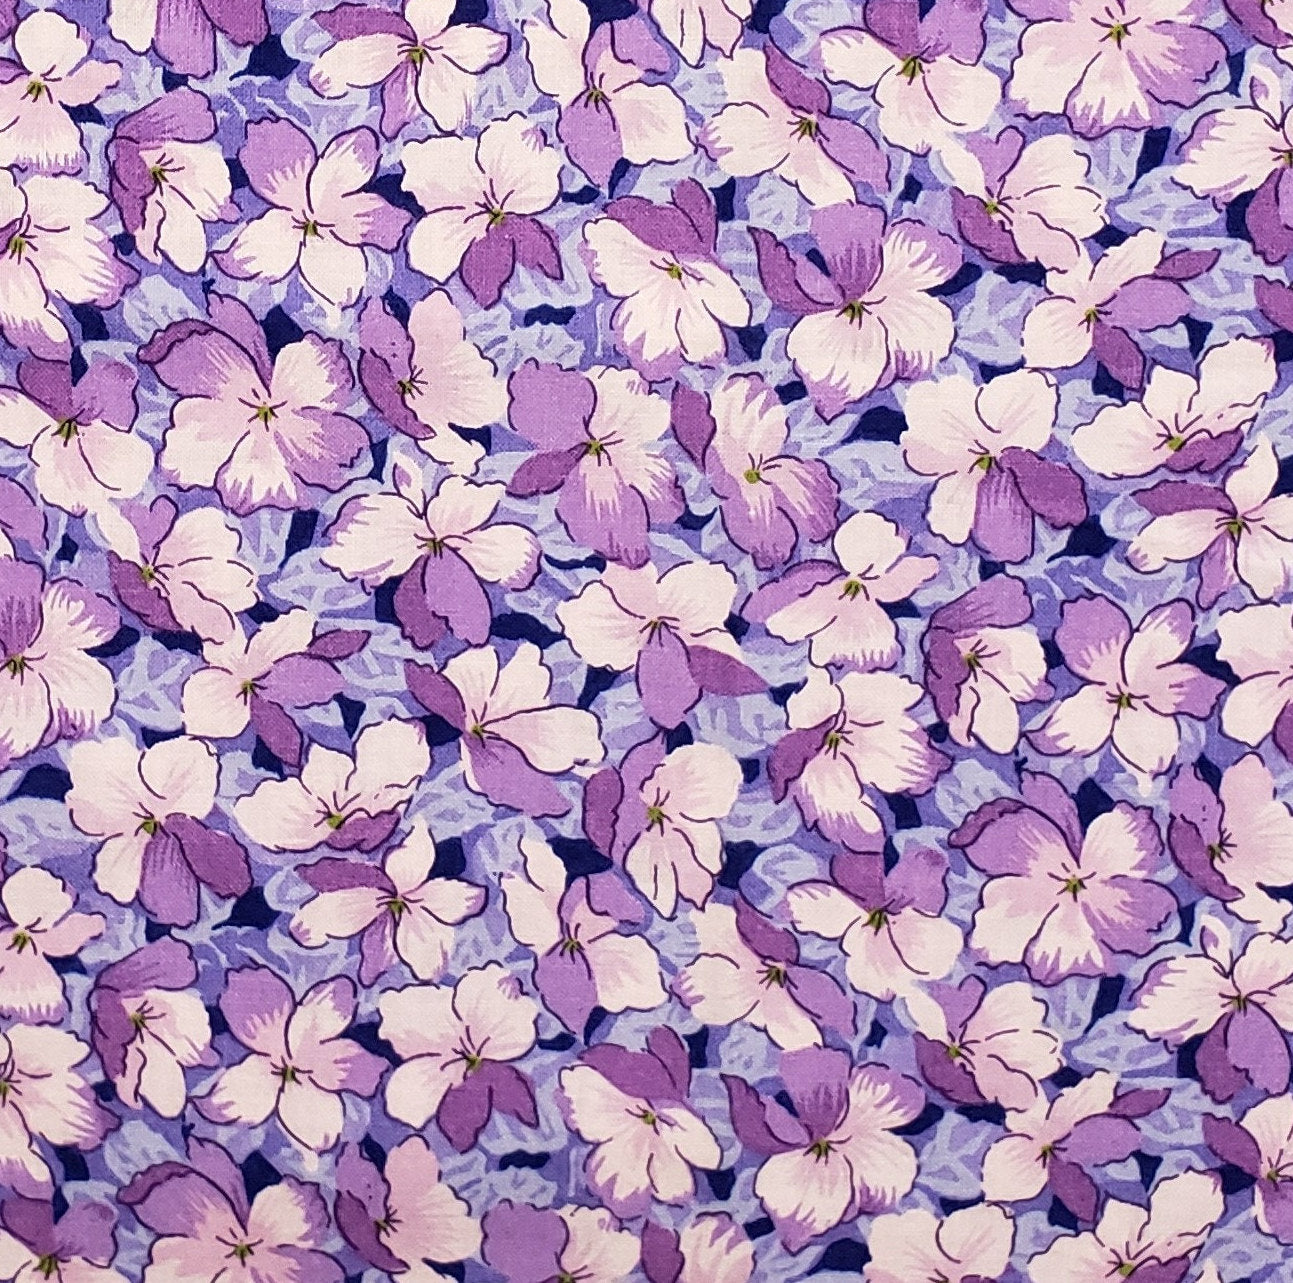 Floral Print Fabric in Tones of Purple and Lavender